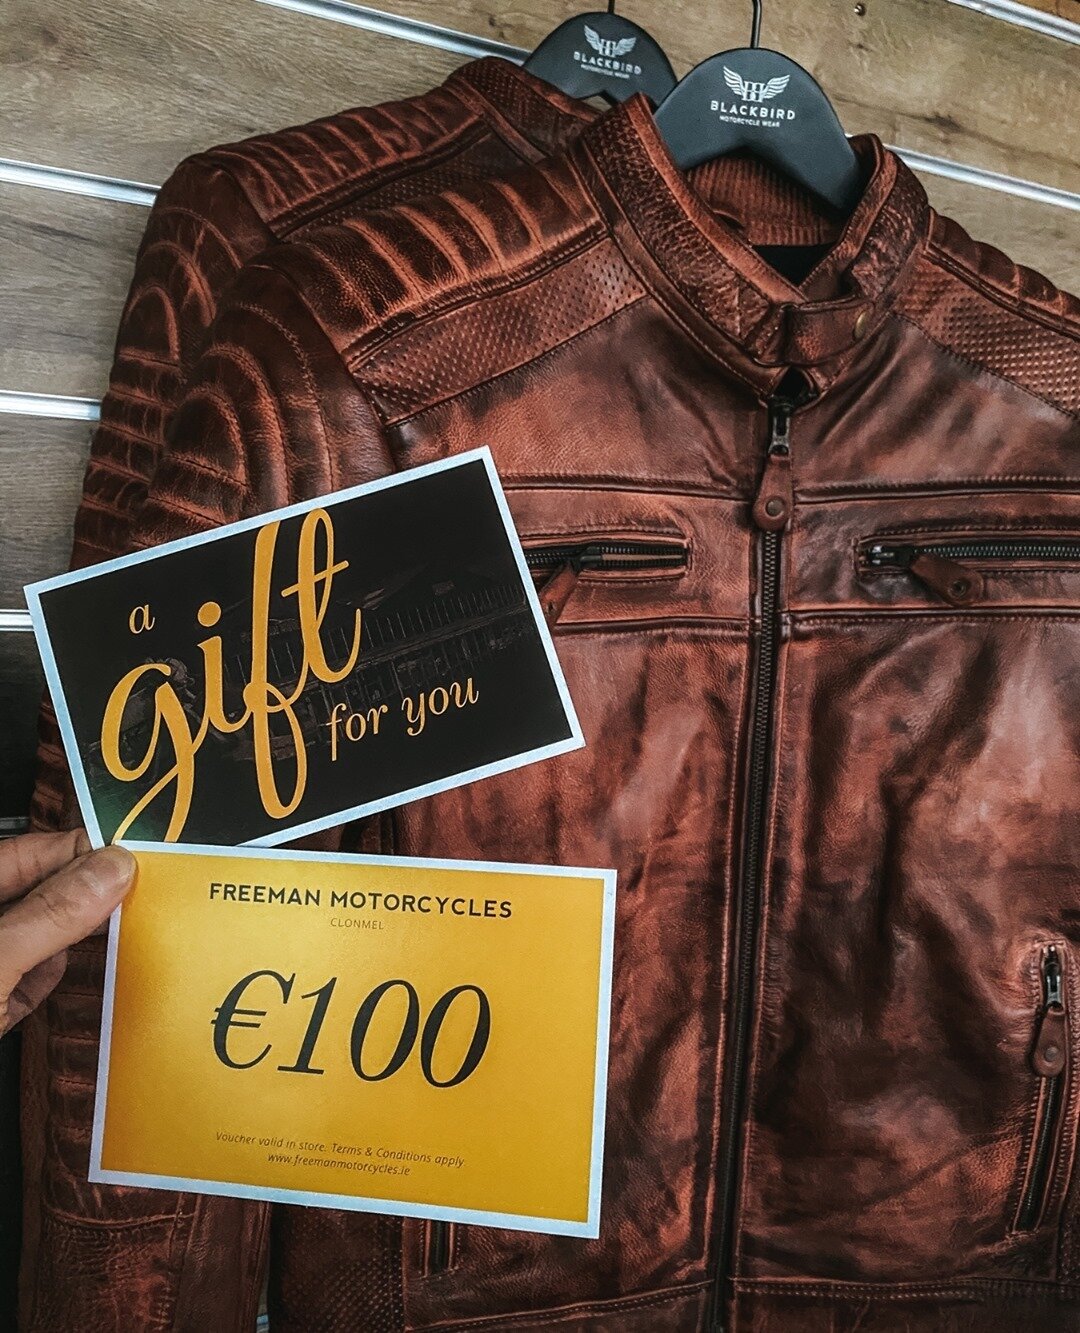 We have Gift Vouchers available in denominations of &euro;10, &euro;20, &euro;50 &amp; &euro;100. ⁠
⁠
Your motolover could use it towards a motorcycle service, a new helmet, parts for their bike, or even a kick-ass, stylish new jacket like this @blac